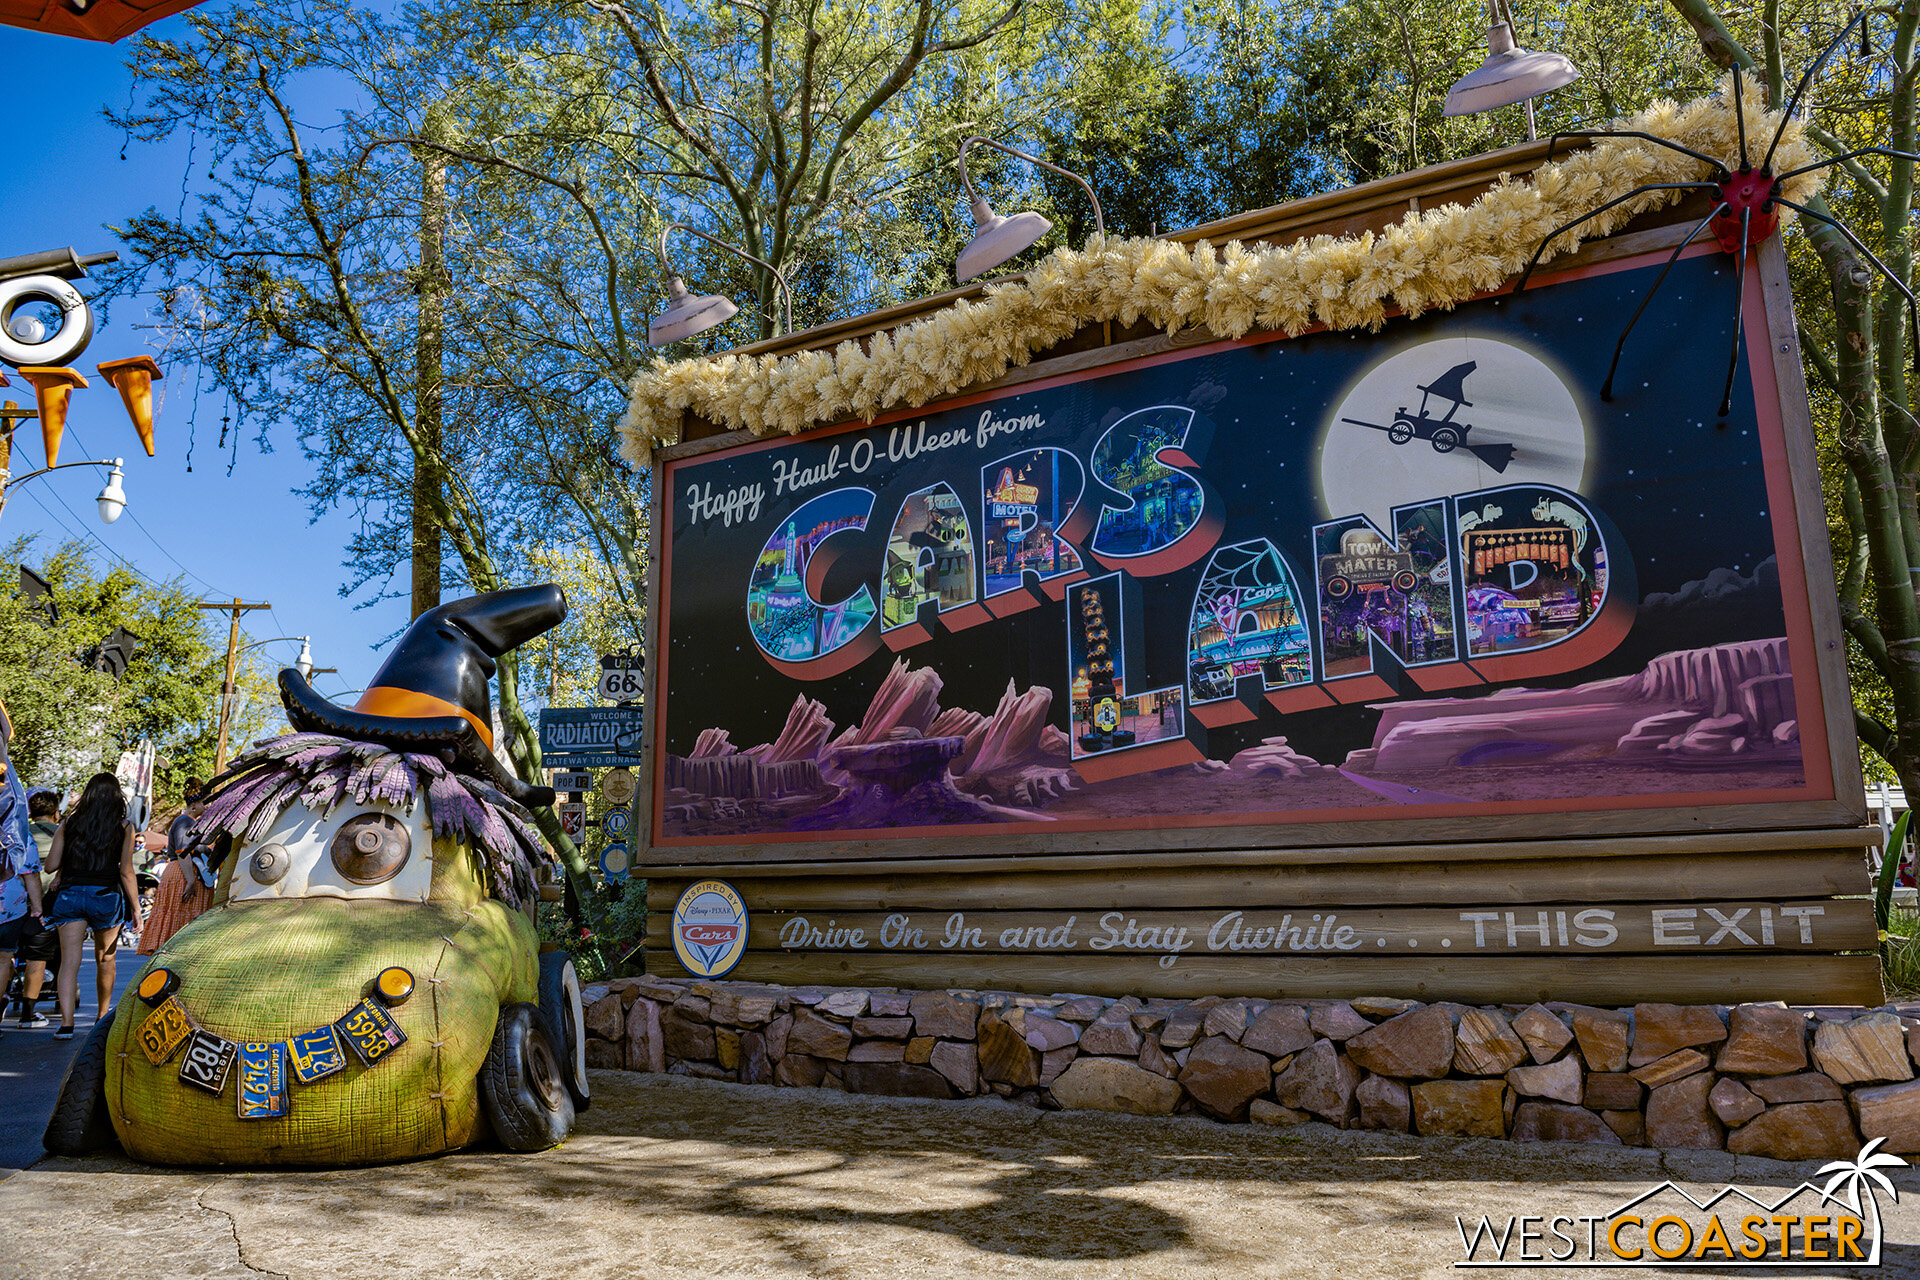  Onto Cars Land, where a witchy scarecar poses in front of the seasonal welcome sign. 